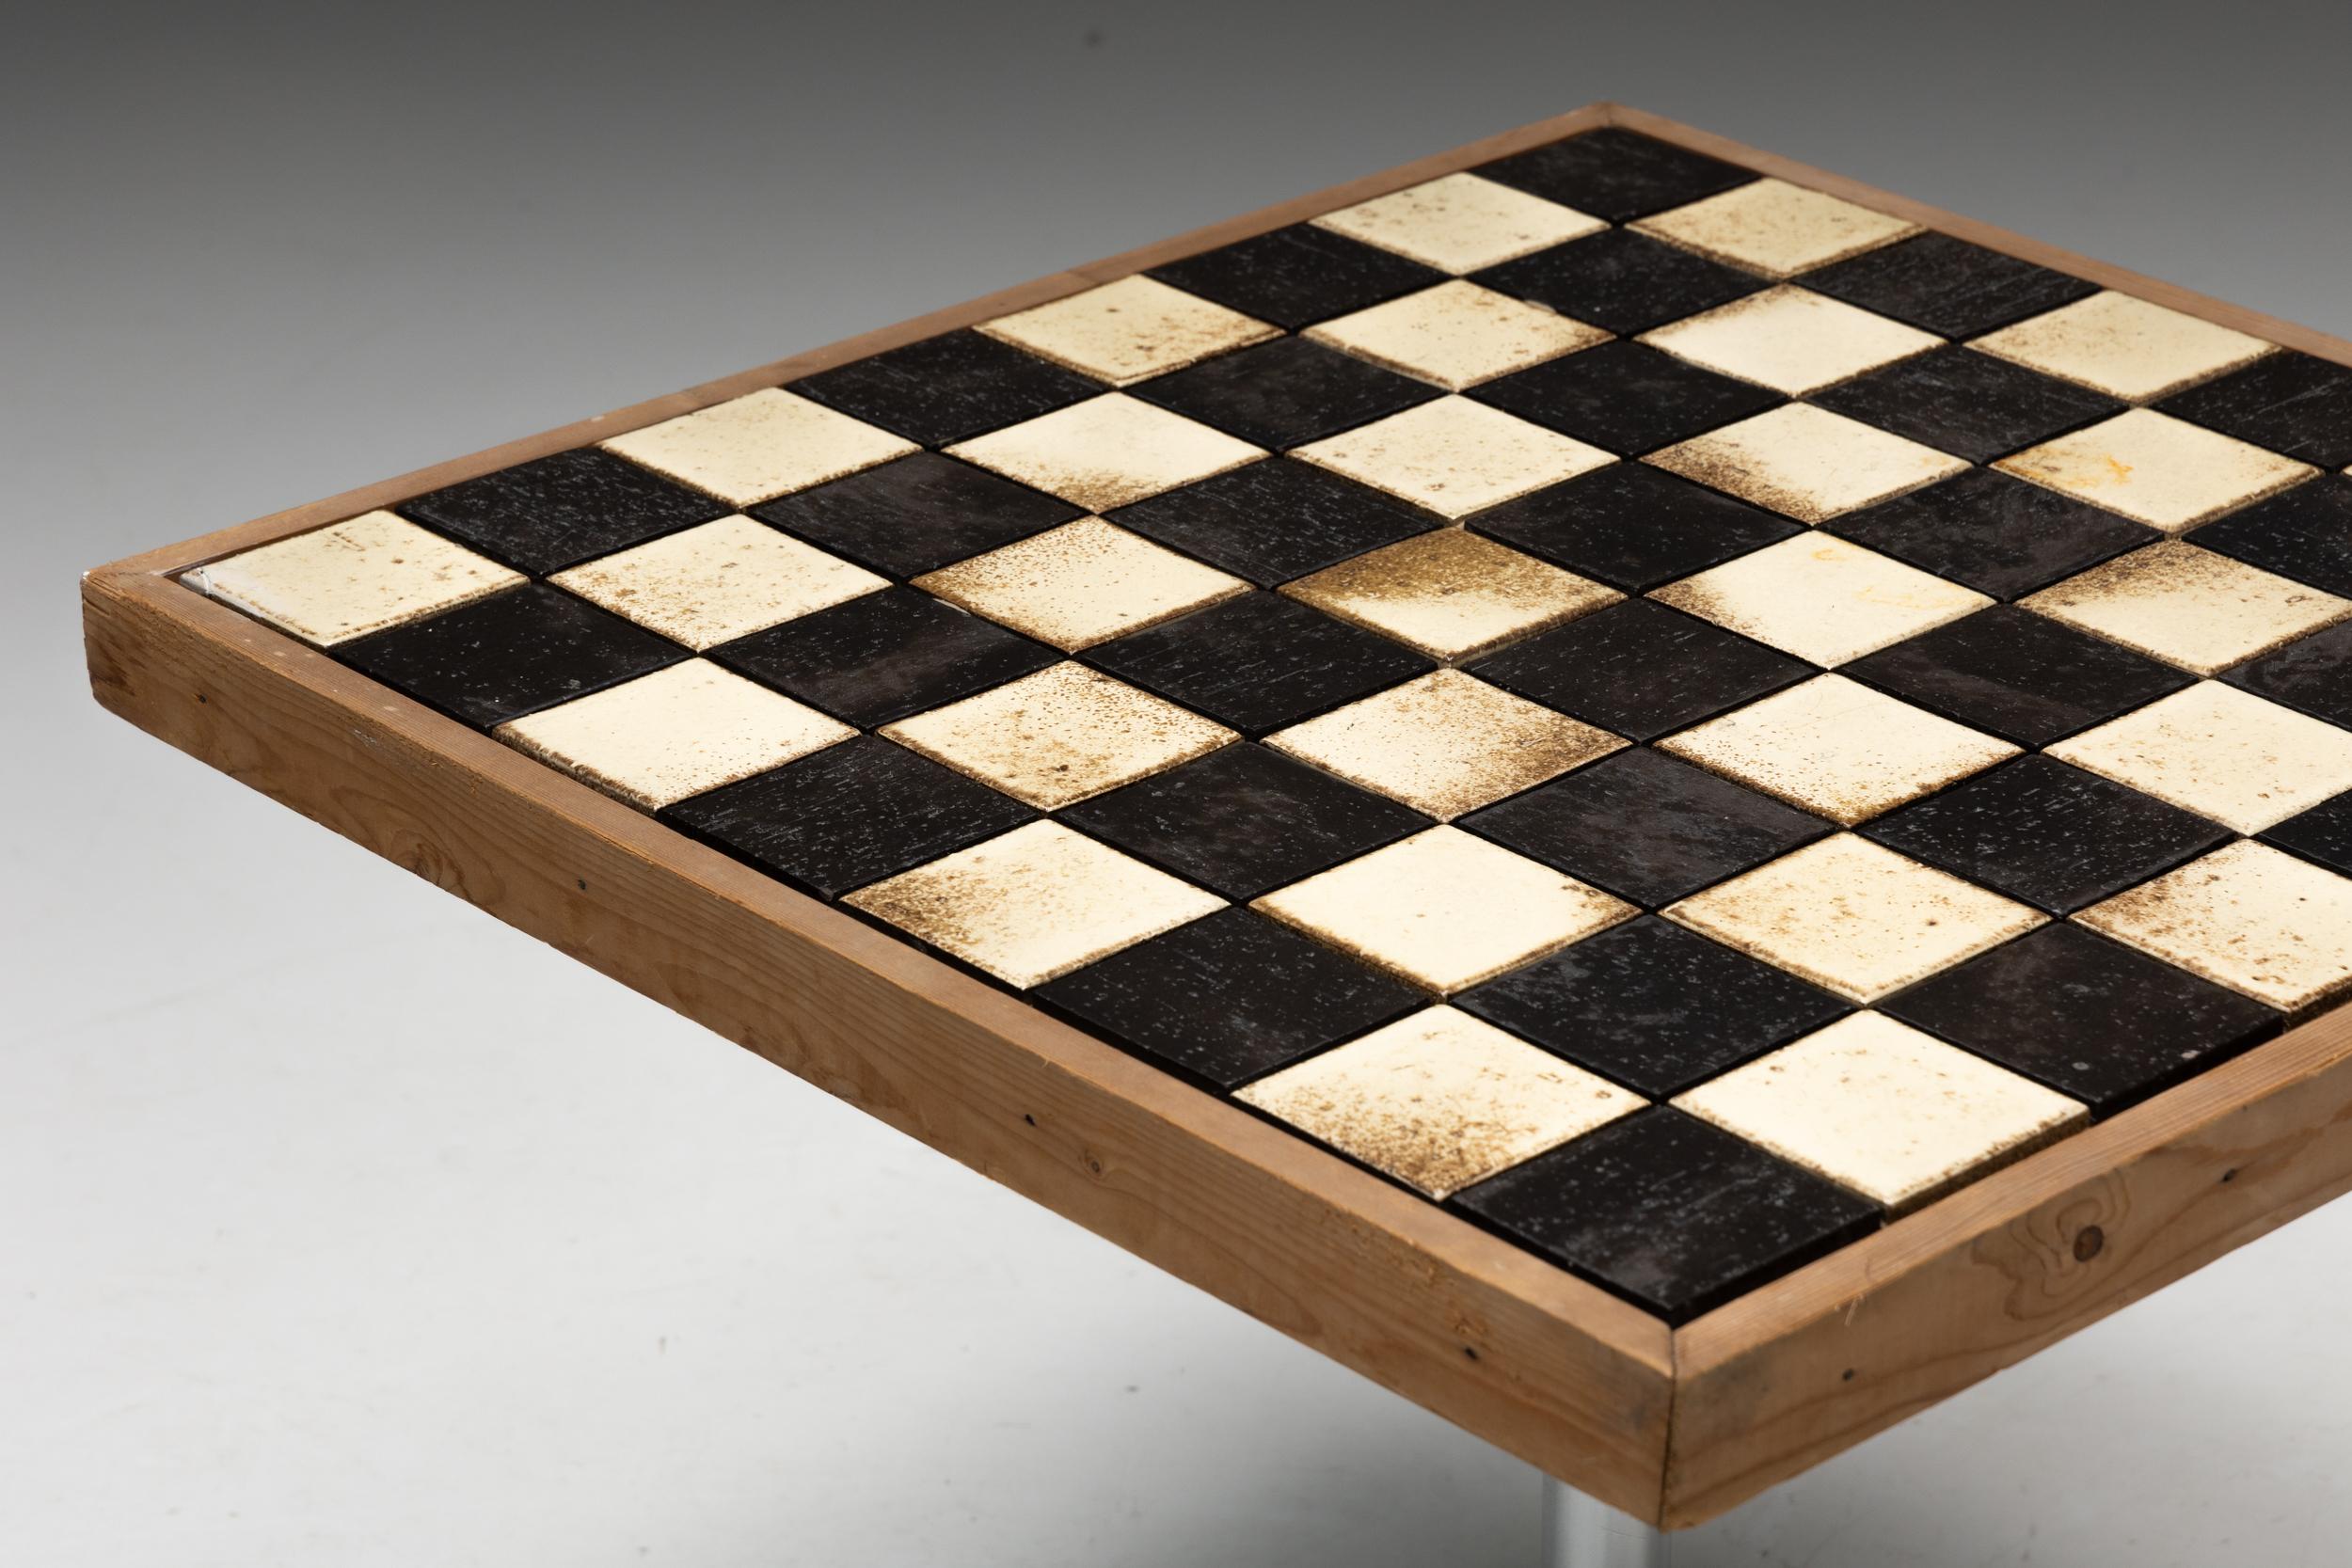 Chess Table; Game Table; Bauhaus; Josef Hartwig; Germany; Schachspiel; 1920s; Chessboard; Minimalist;

Bauhaus game table with chess set designed by Josef Hartwig in 1924. This chess table features a beautifully crafted wooden board with inlaid